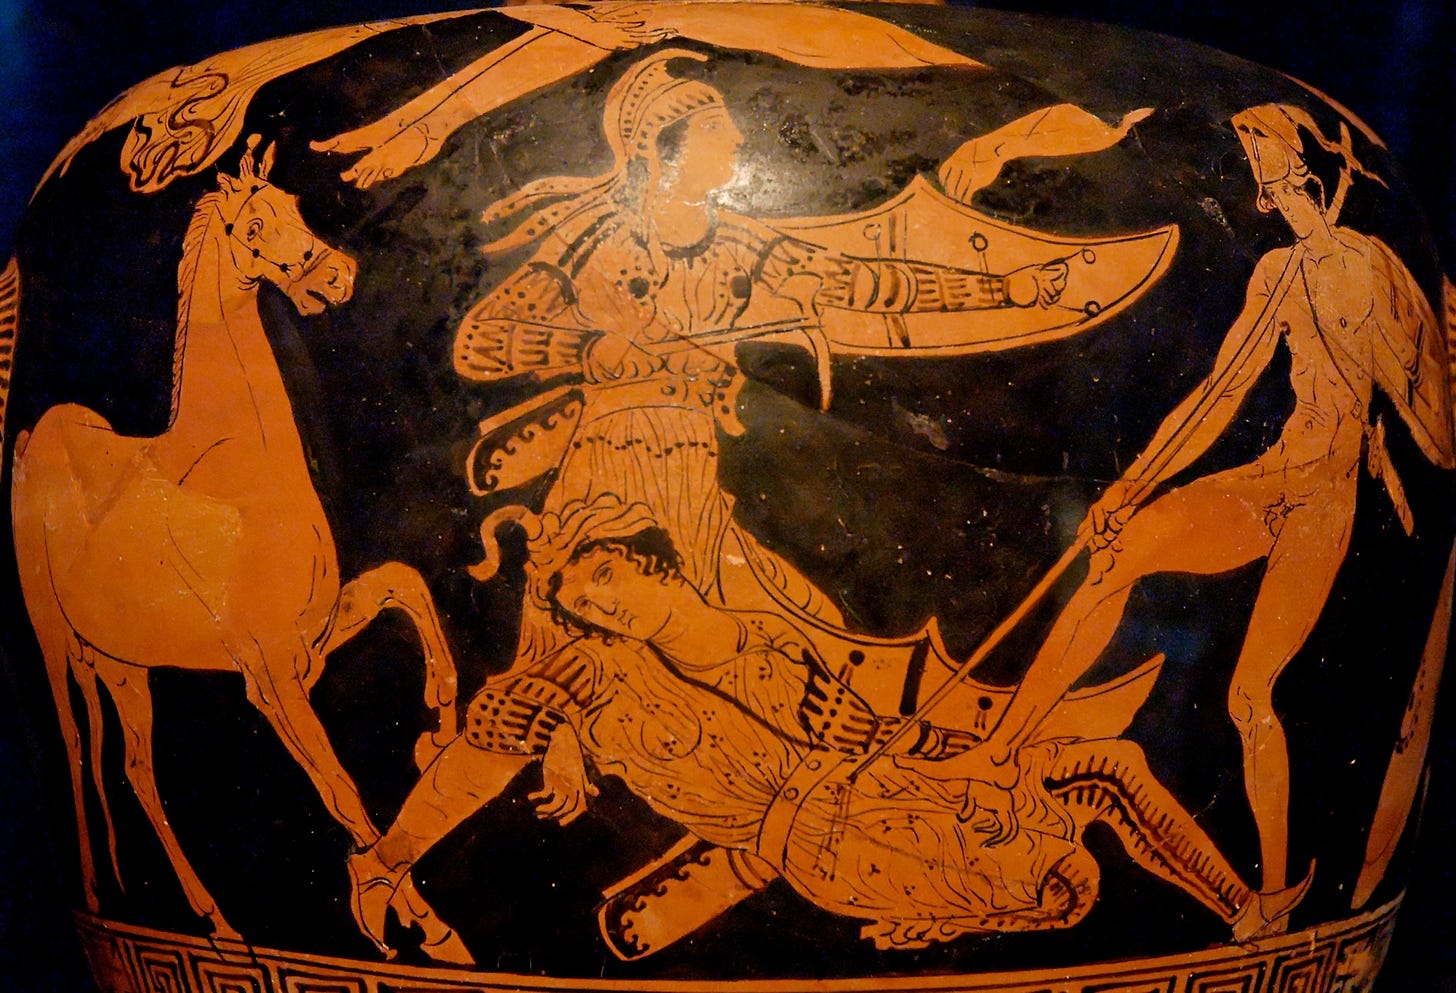 Patroclus (naked, on the right) kills Sarpedon (wearing Lycian clothes, on the left) with his spear, while Glaucus comes to the latter's help. Protolucana red-figure hydria by the Policoro Painter, ca. 400 BC. From the so-called tomb of the Policoro Painter in Heraclaea. Stored in the Museo Nazionale Archaeologico of Policoro.